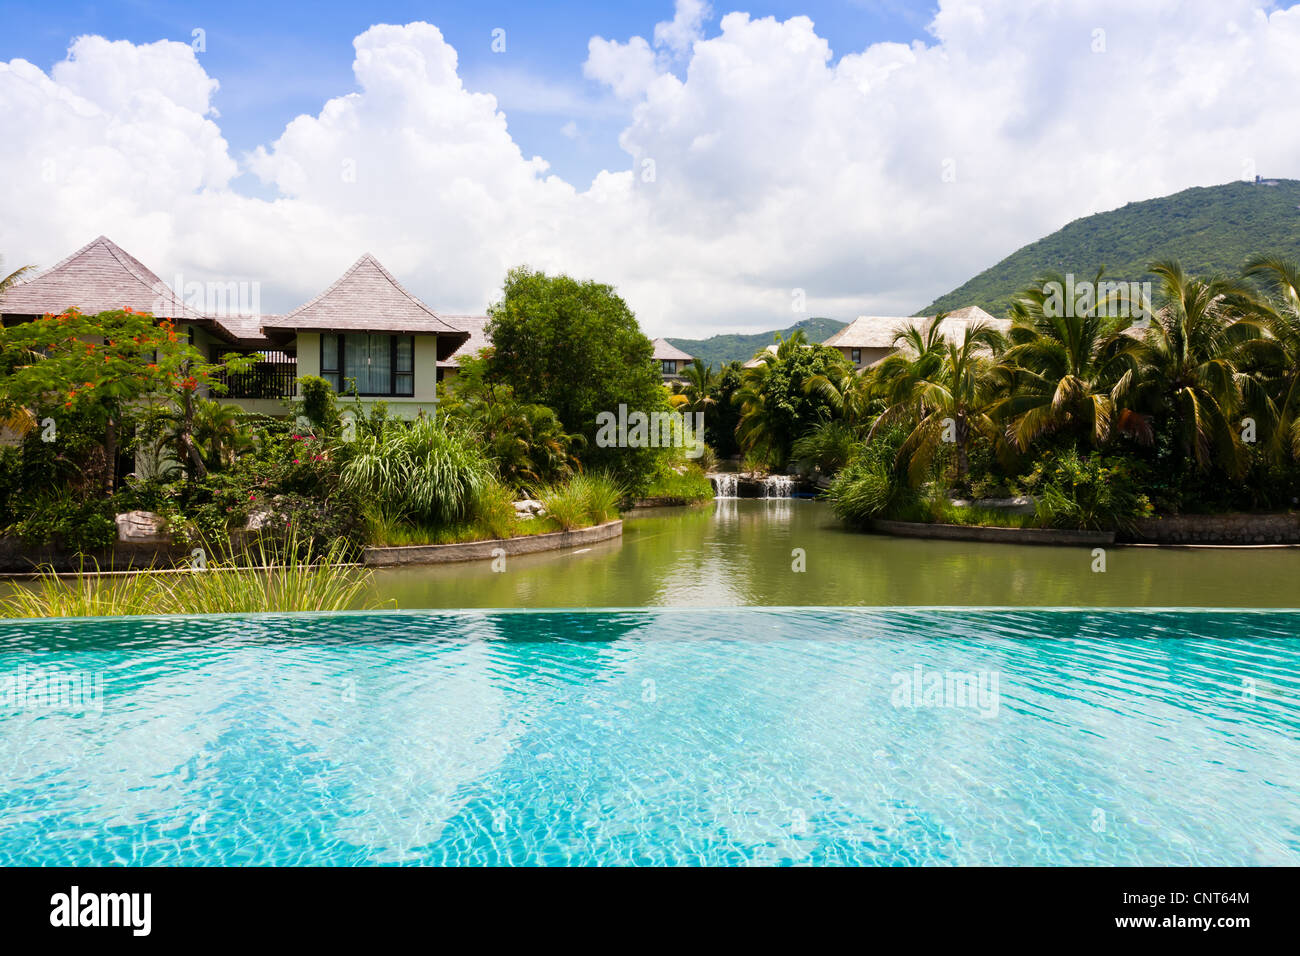 Tropical landscape of swimming pool, pond, holiday villas and trees. Stock Photo